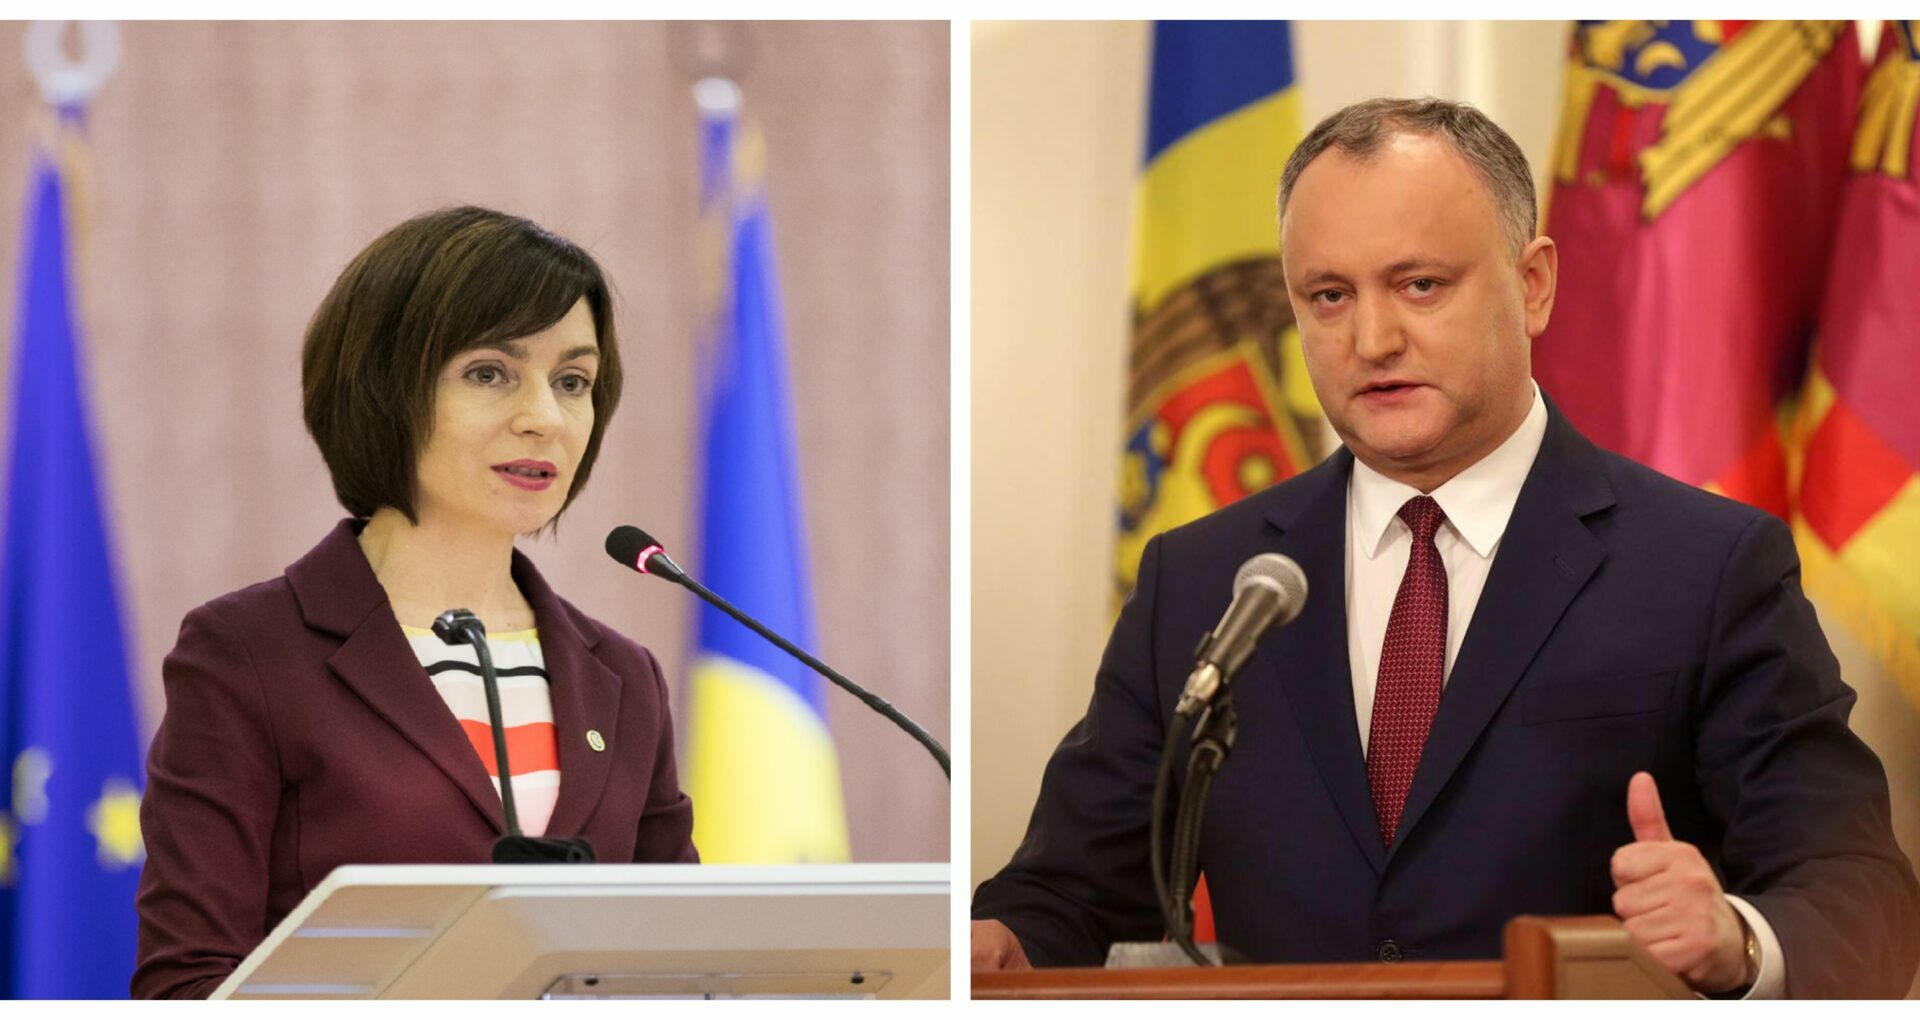 IRI Poll: The President of Moldova Will Be Elected in the Second Round